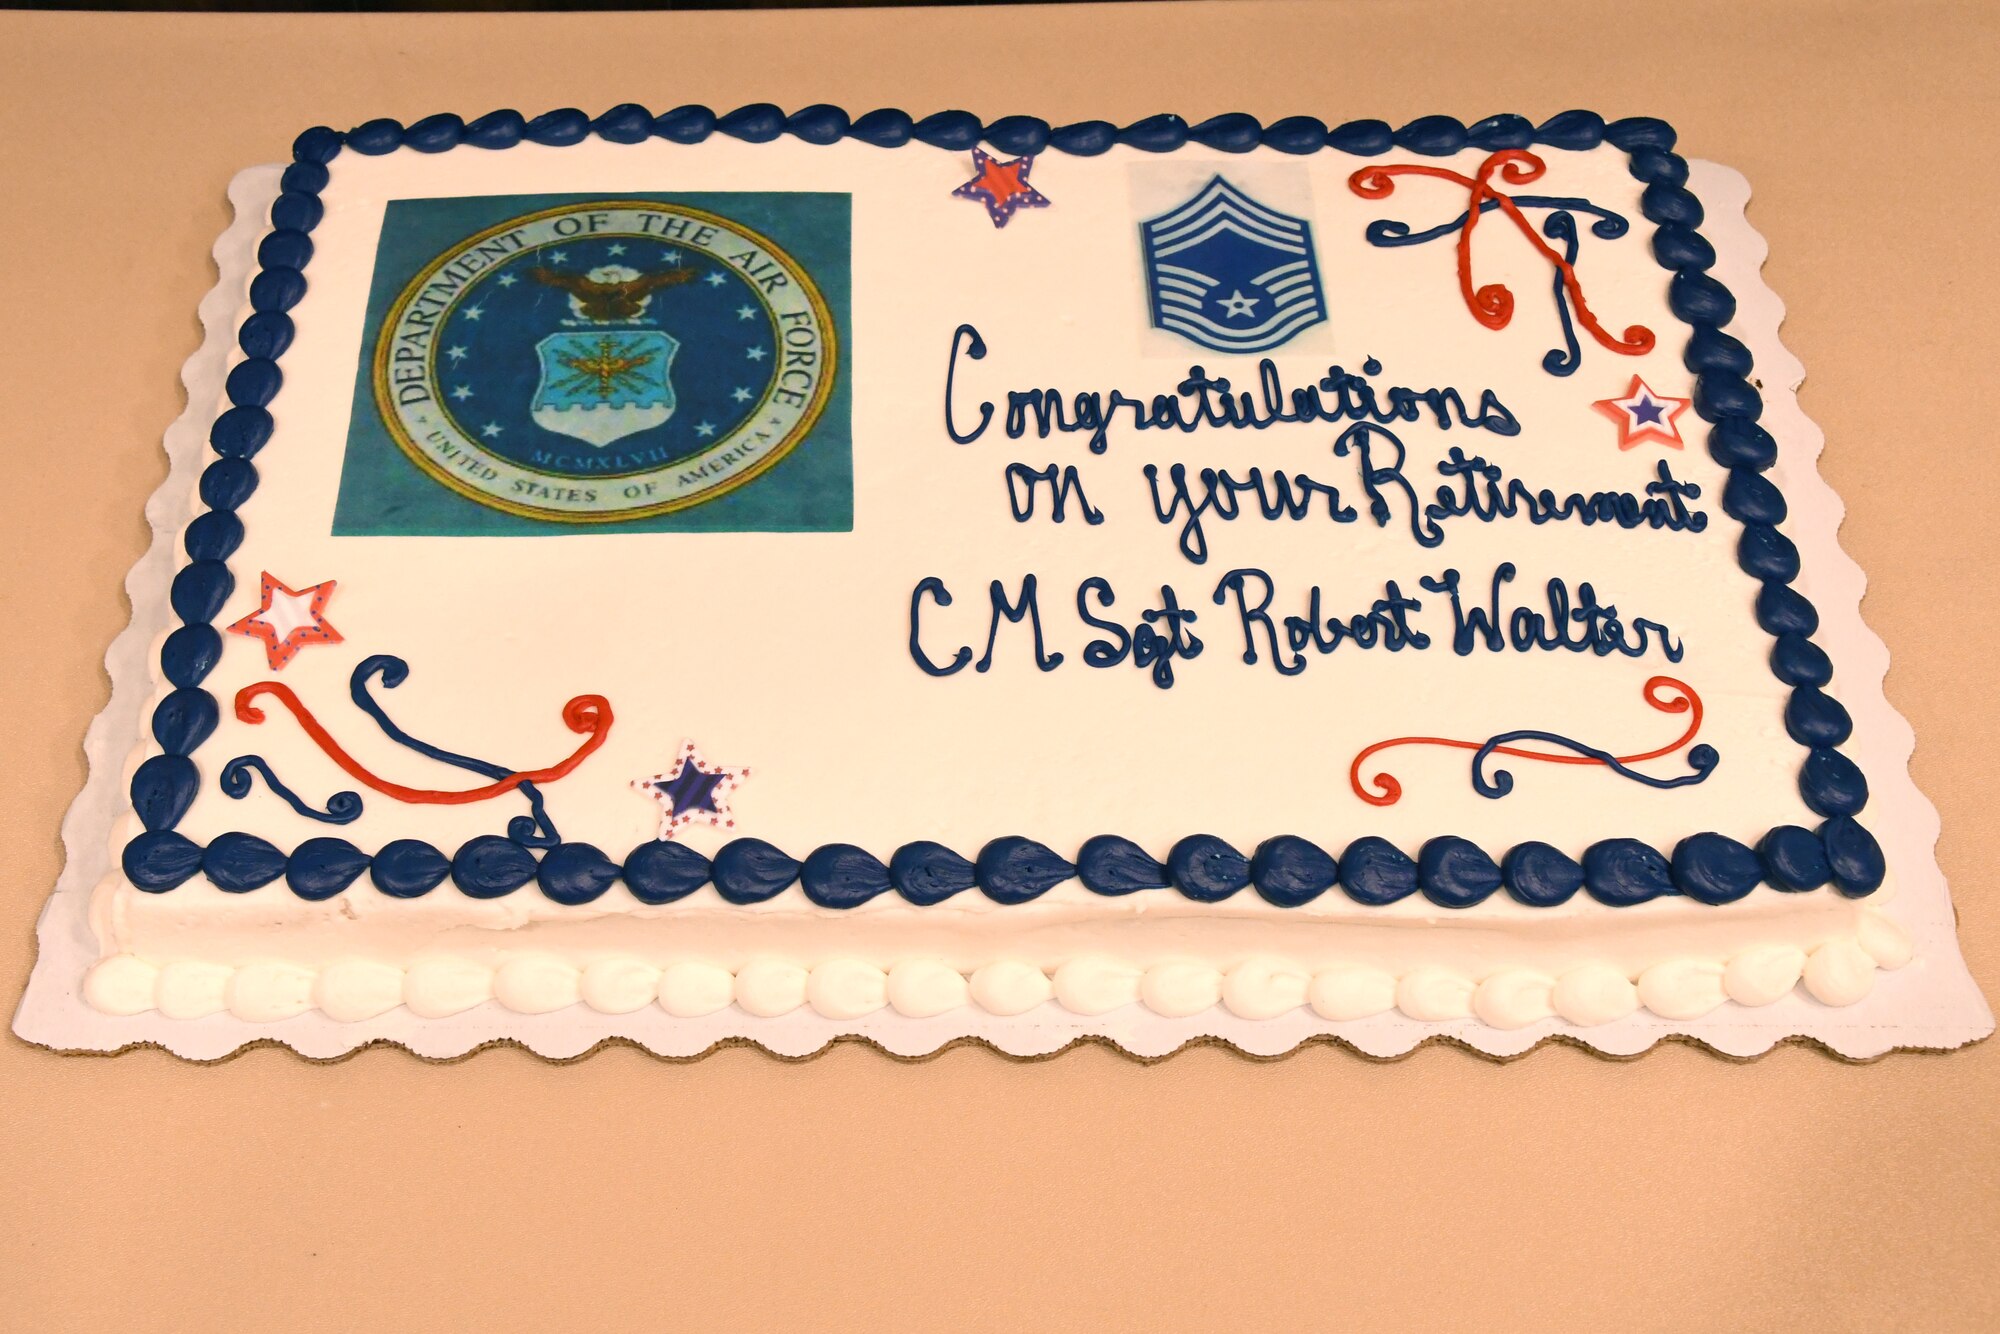 The cake created for Chief Master Sgt. Robert L. Walter, 94th Force Support Squadron superintendent, who retired after 36 years of service. (U.S. Air Force photo/Senior Airman Josh Kincaid)